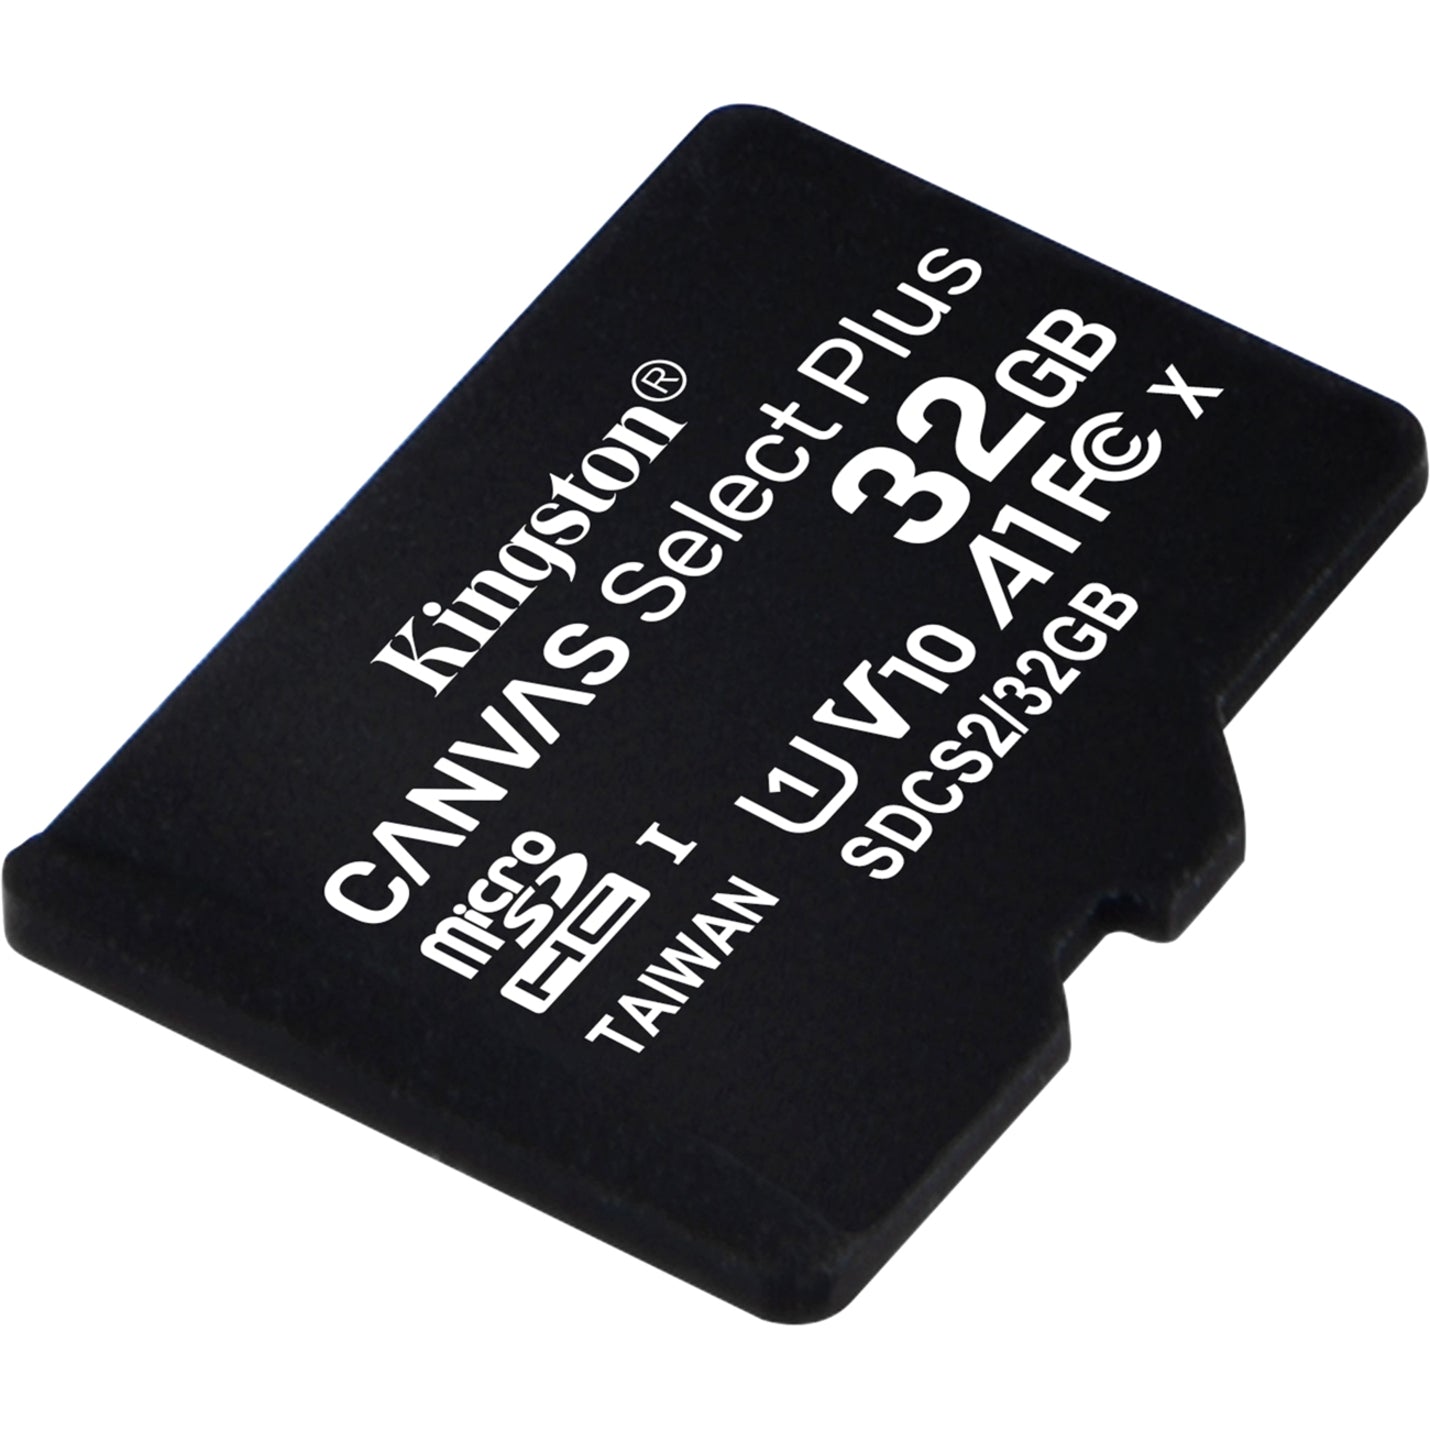 Kingston SDCS2/32GBSP Canvas Select Plus microSD Card With Android A1 Performance Class, 32GB Storage Capacity, 100 MB/s Read Speed, Class 10/UHS-I (U1)